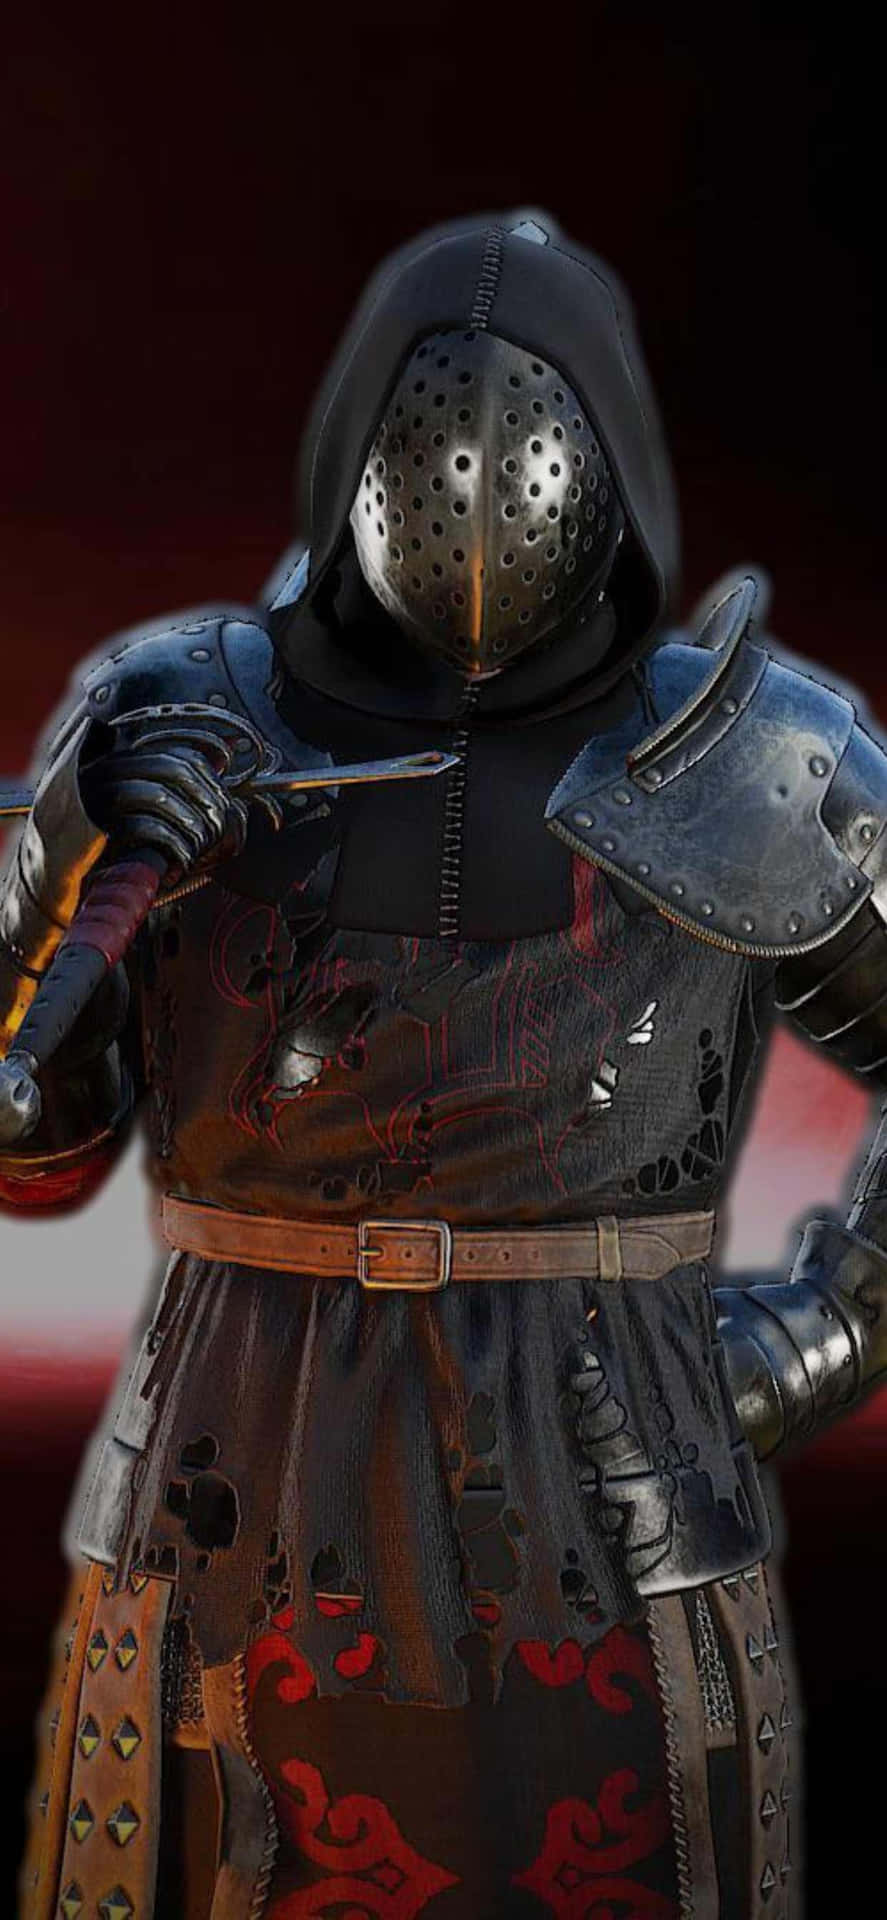 Feel the thrill of battle with the iPhone Xs Max Mordhau.